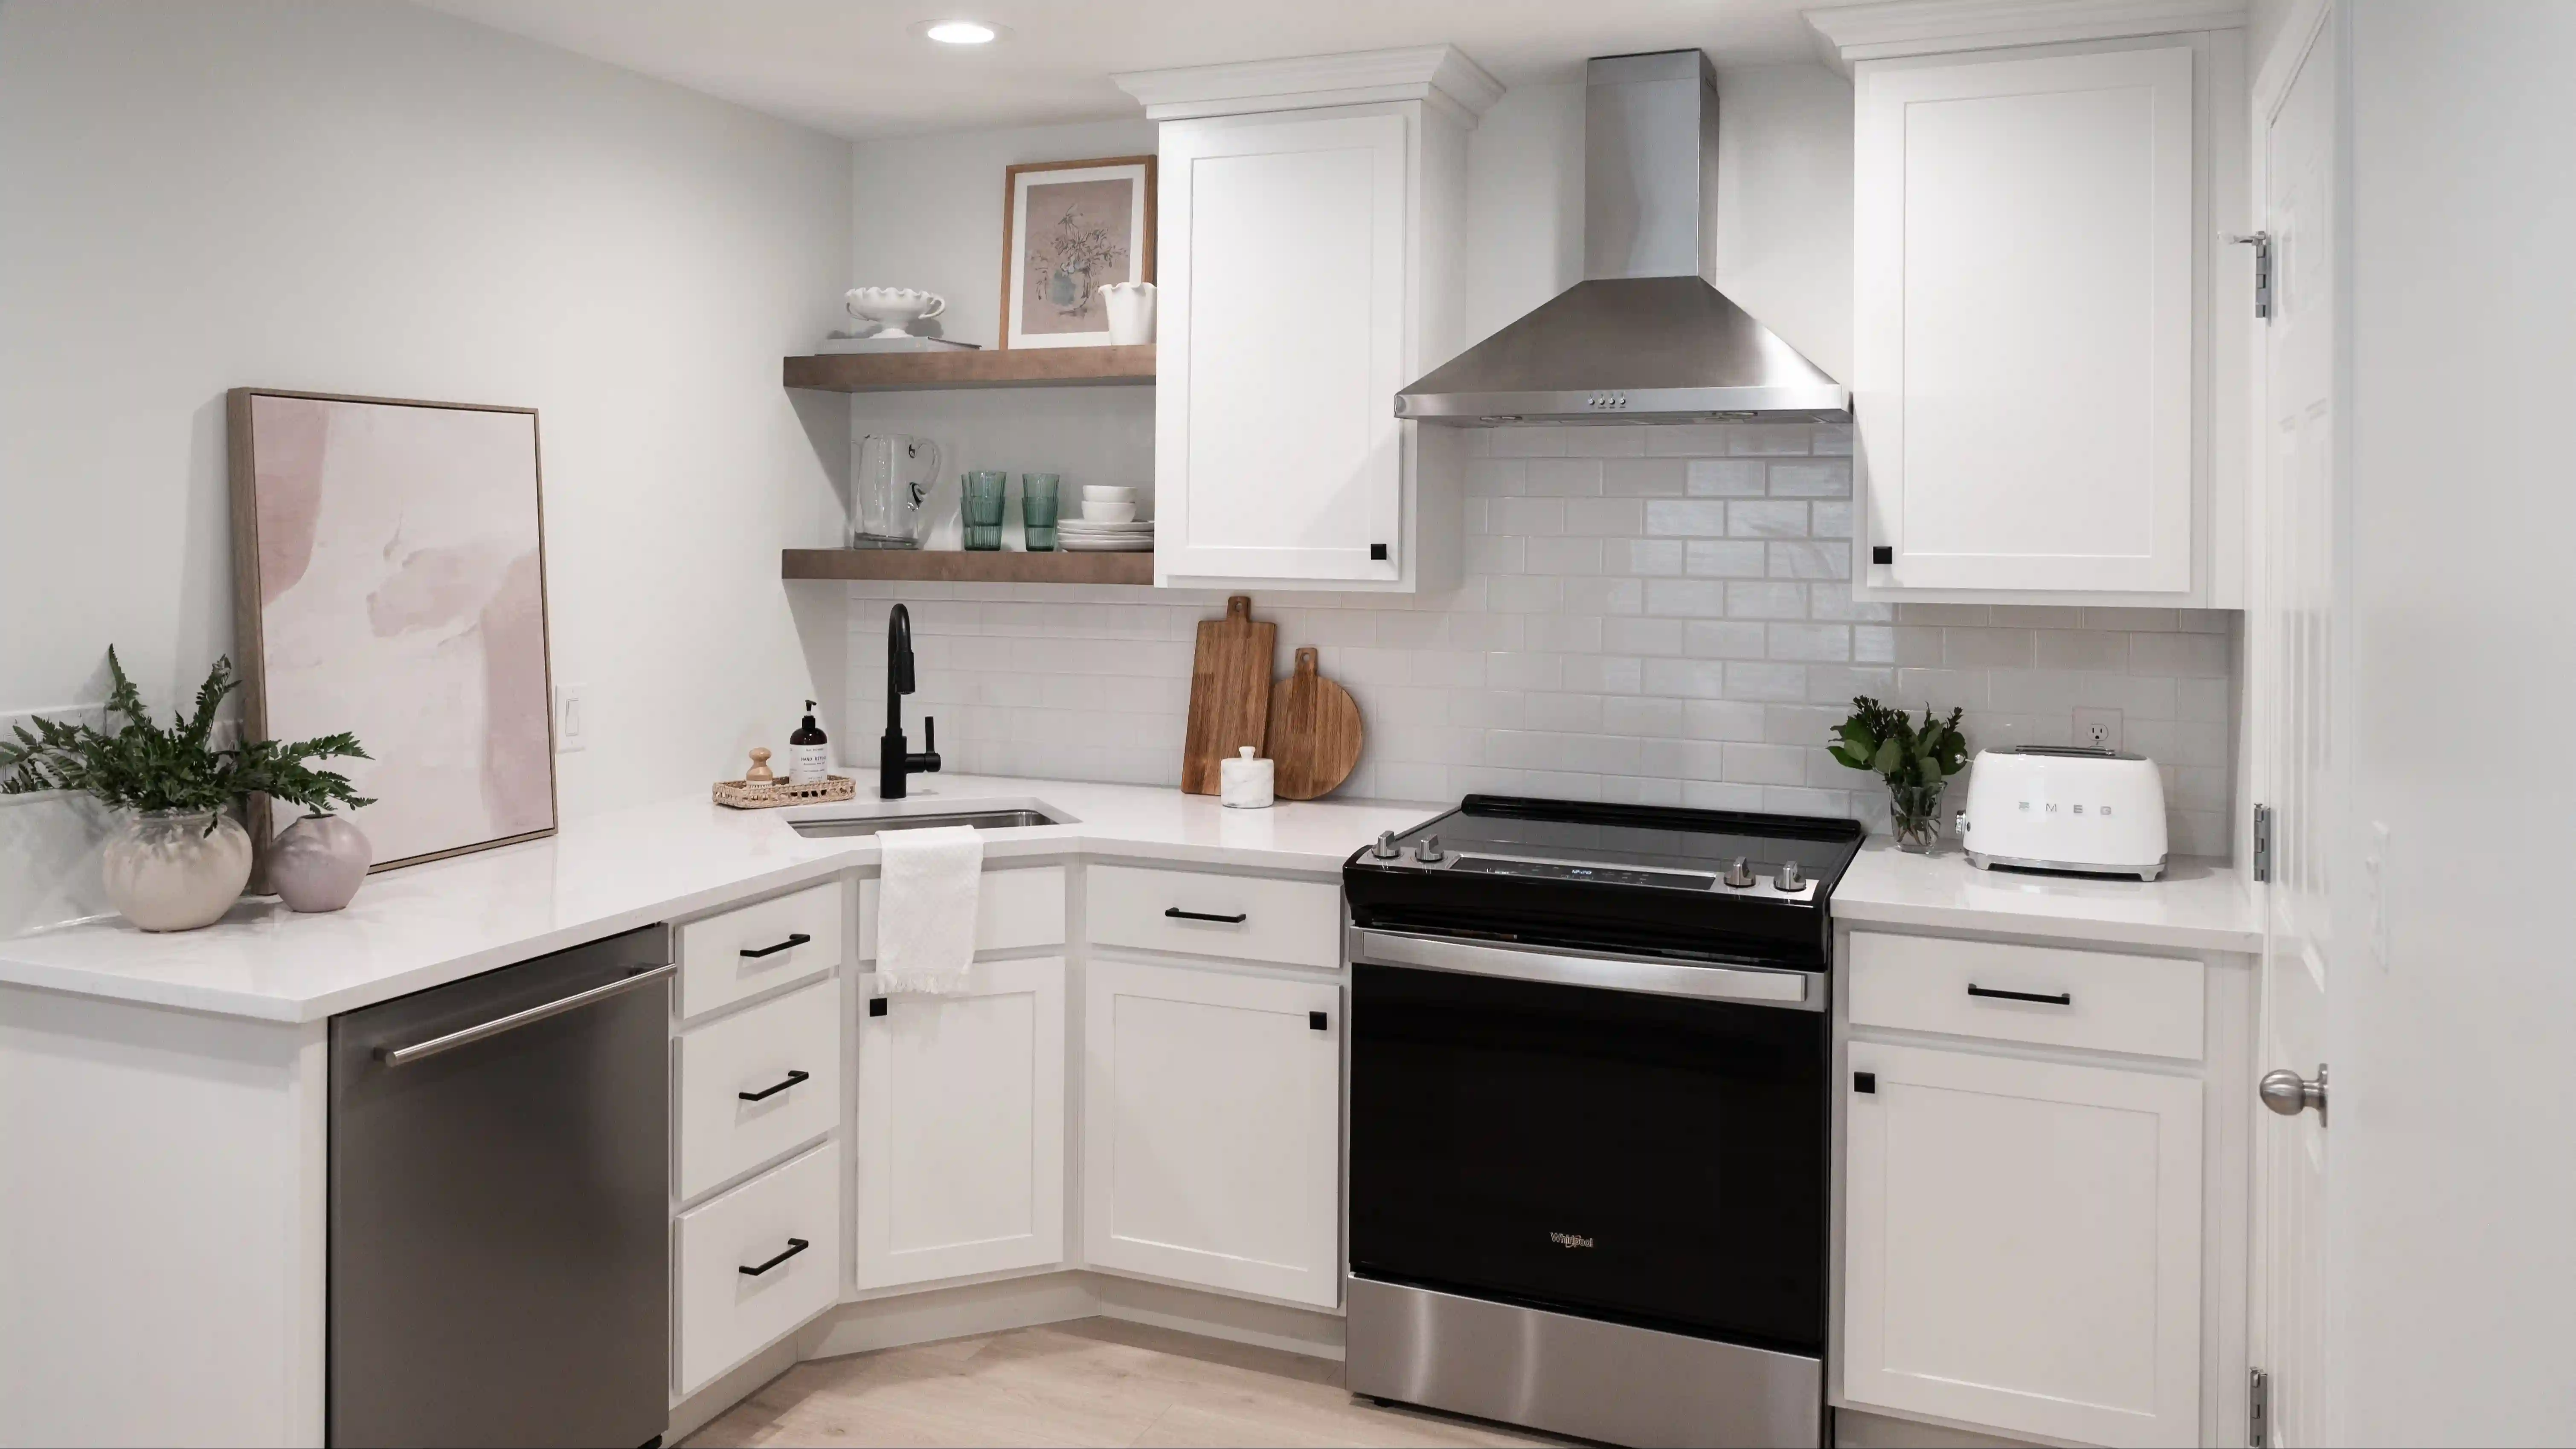 A small kitchen with white subway tile backsplash above white quartz countertops over white cabinetry. This small kitchen was designed strategically for the small room it had to be built within. 